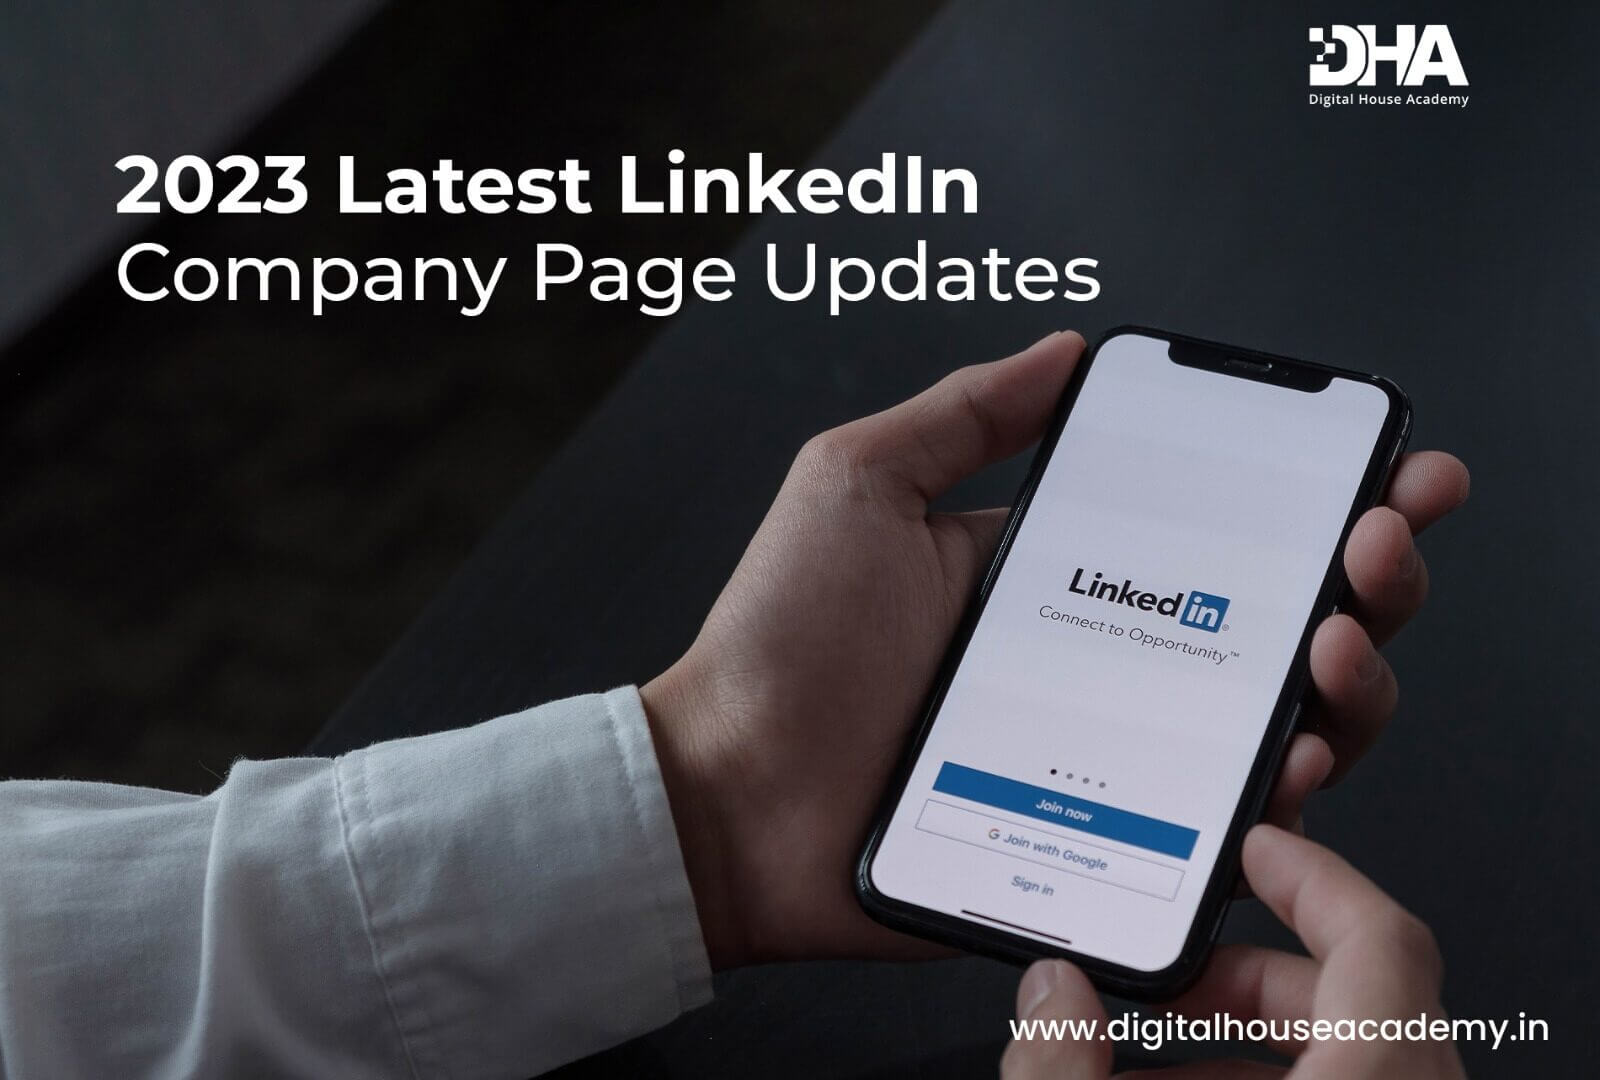 LinkedIn Company Page updates for 2023